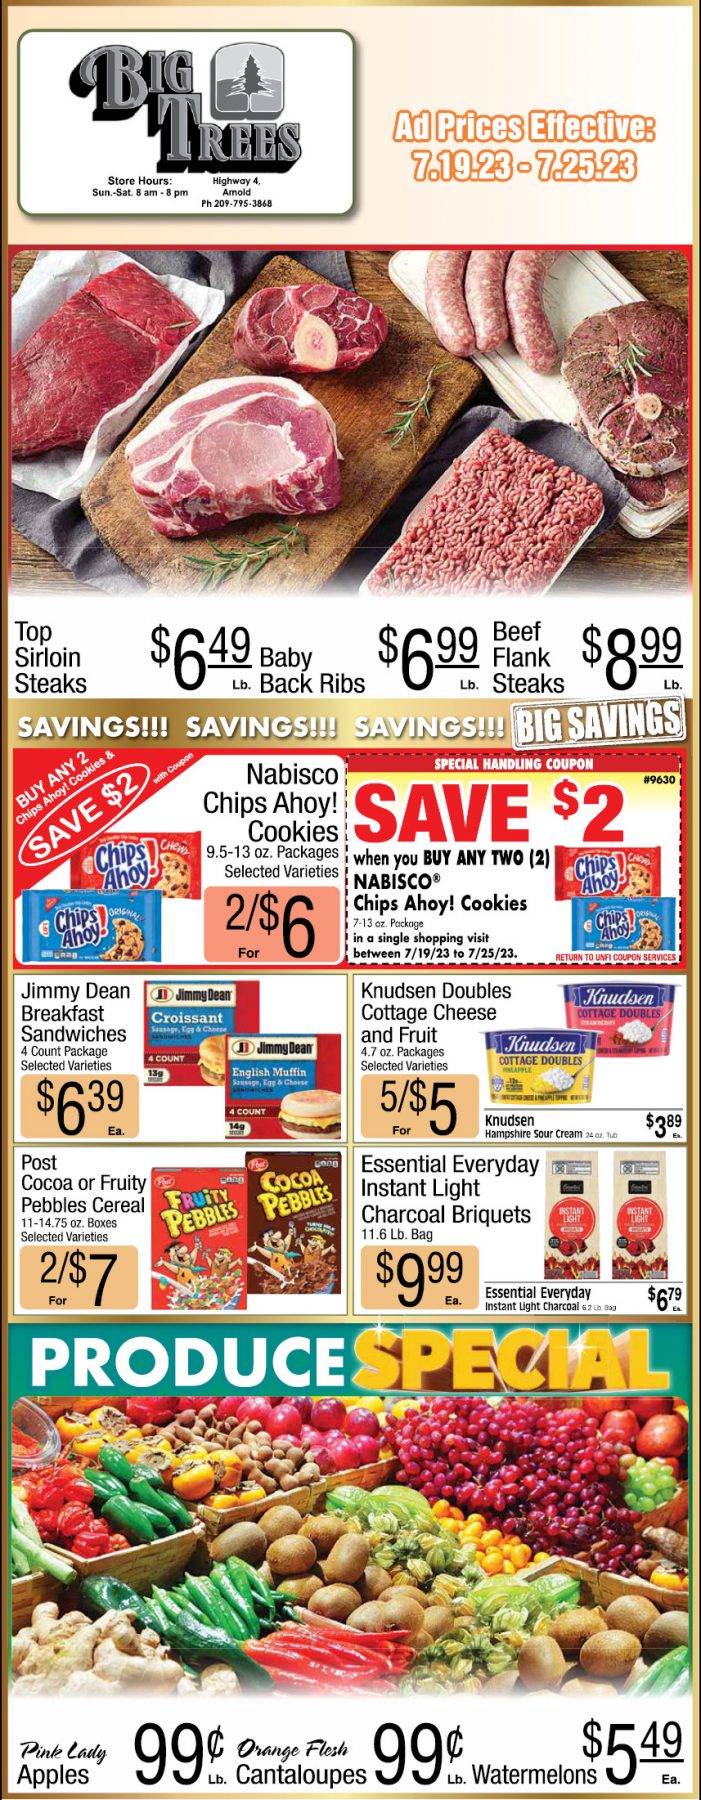 Big Trees Market Weekly Ad, Grocery, Produce, Meat & Deli Specials July 19 ~ 25!  Shop Local & Save!